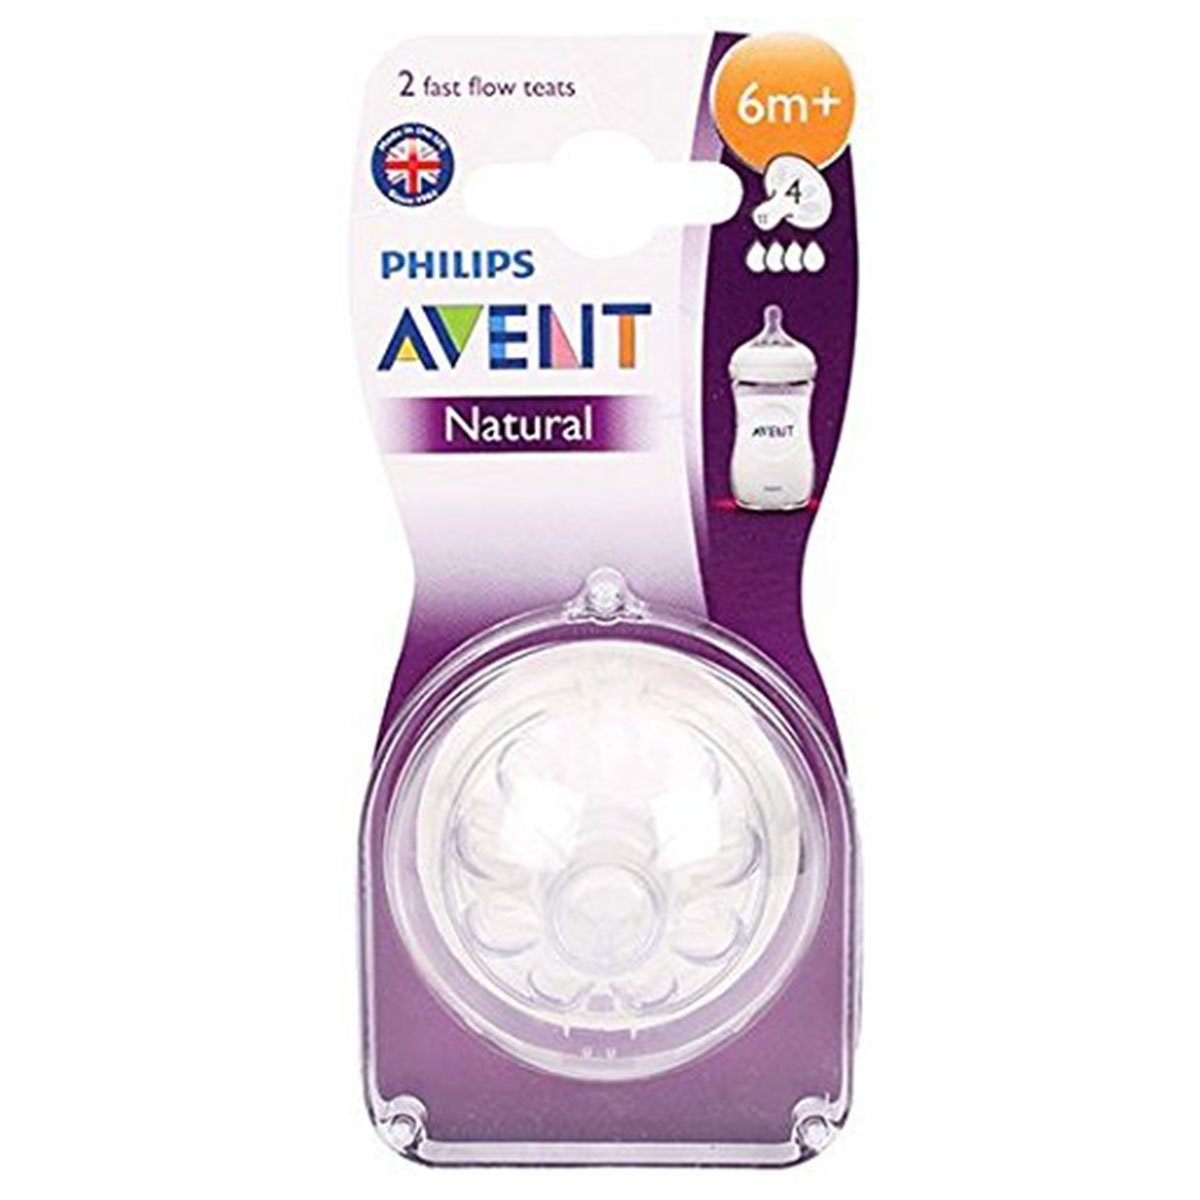 Philips Avent Natural Teat - 6M+ Fast Flow (Twin Pack) - Nesh Kids Store